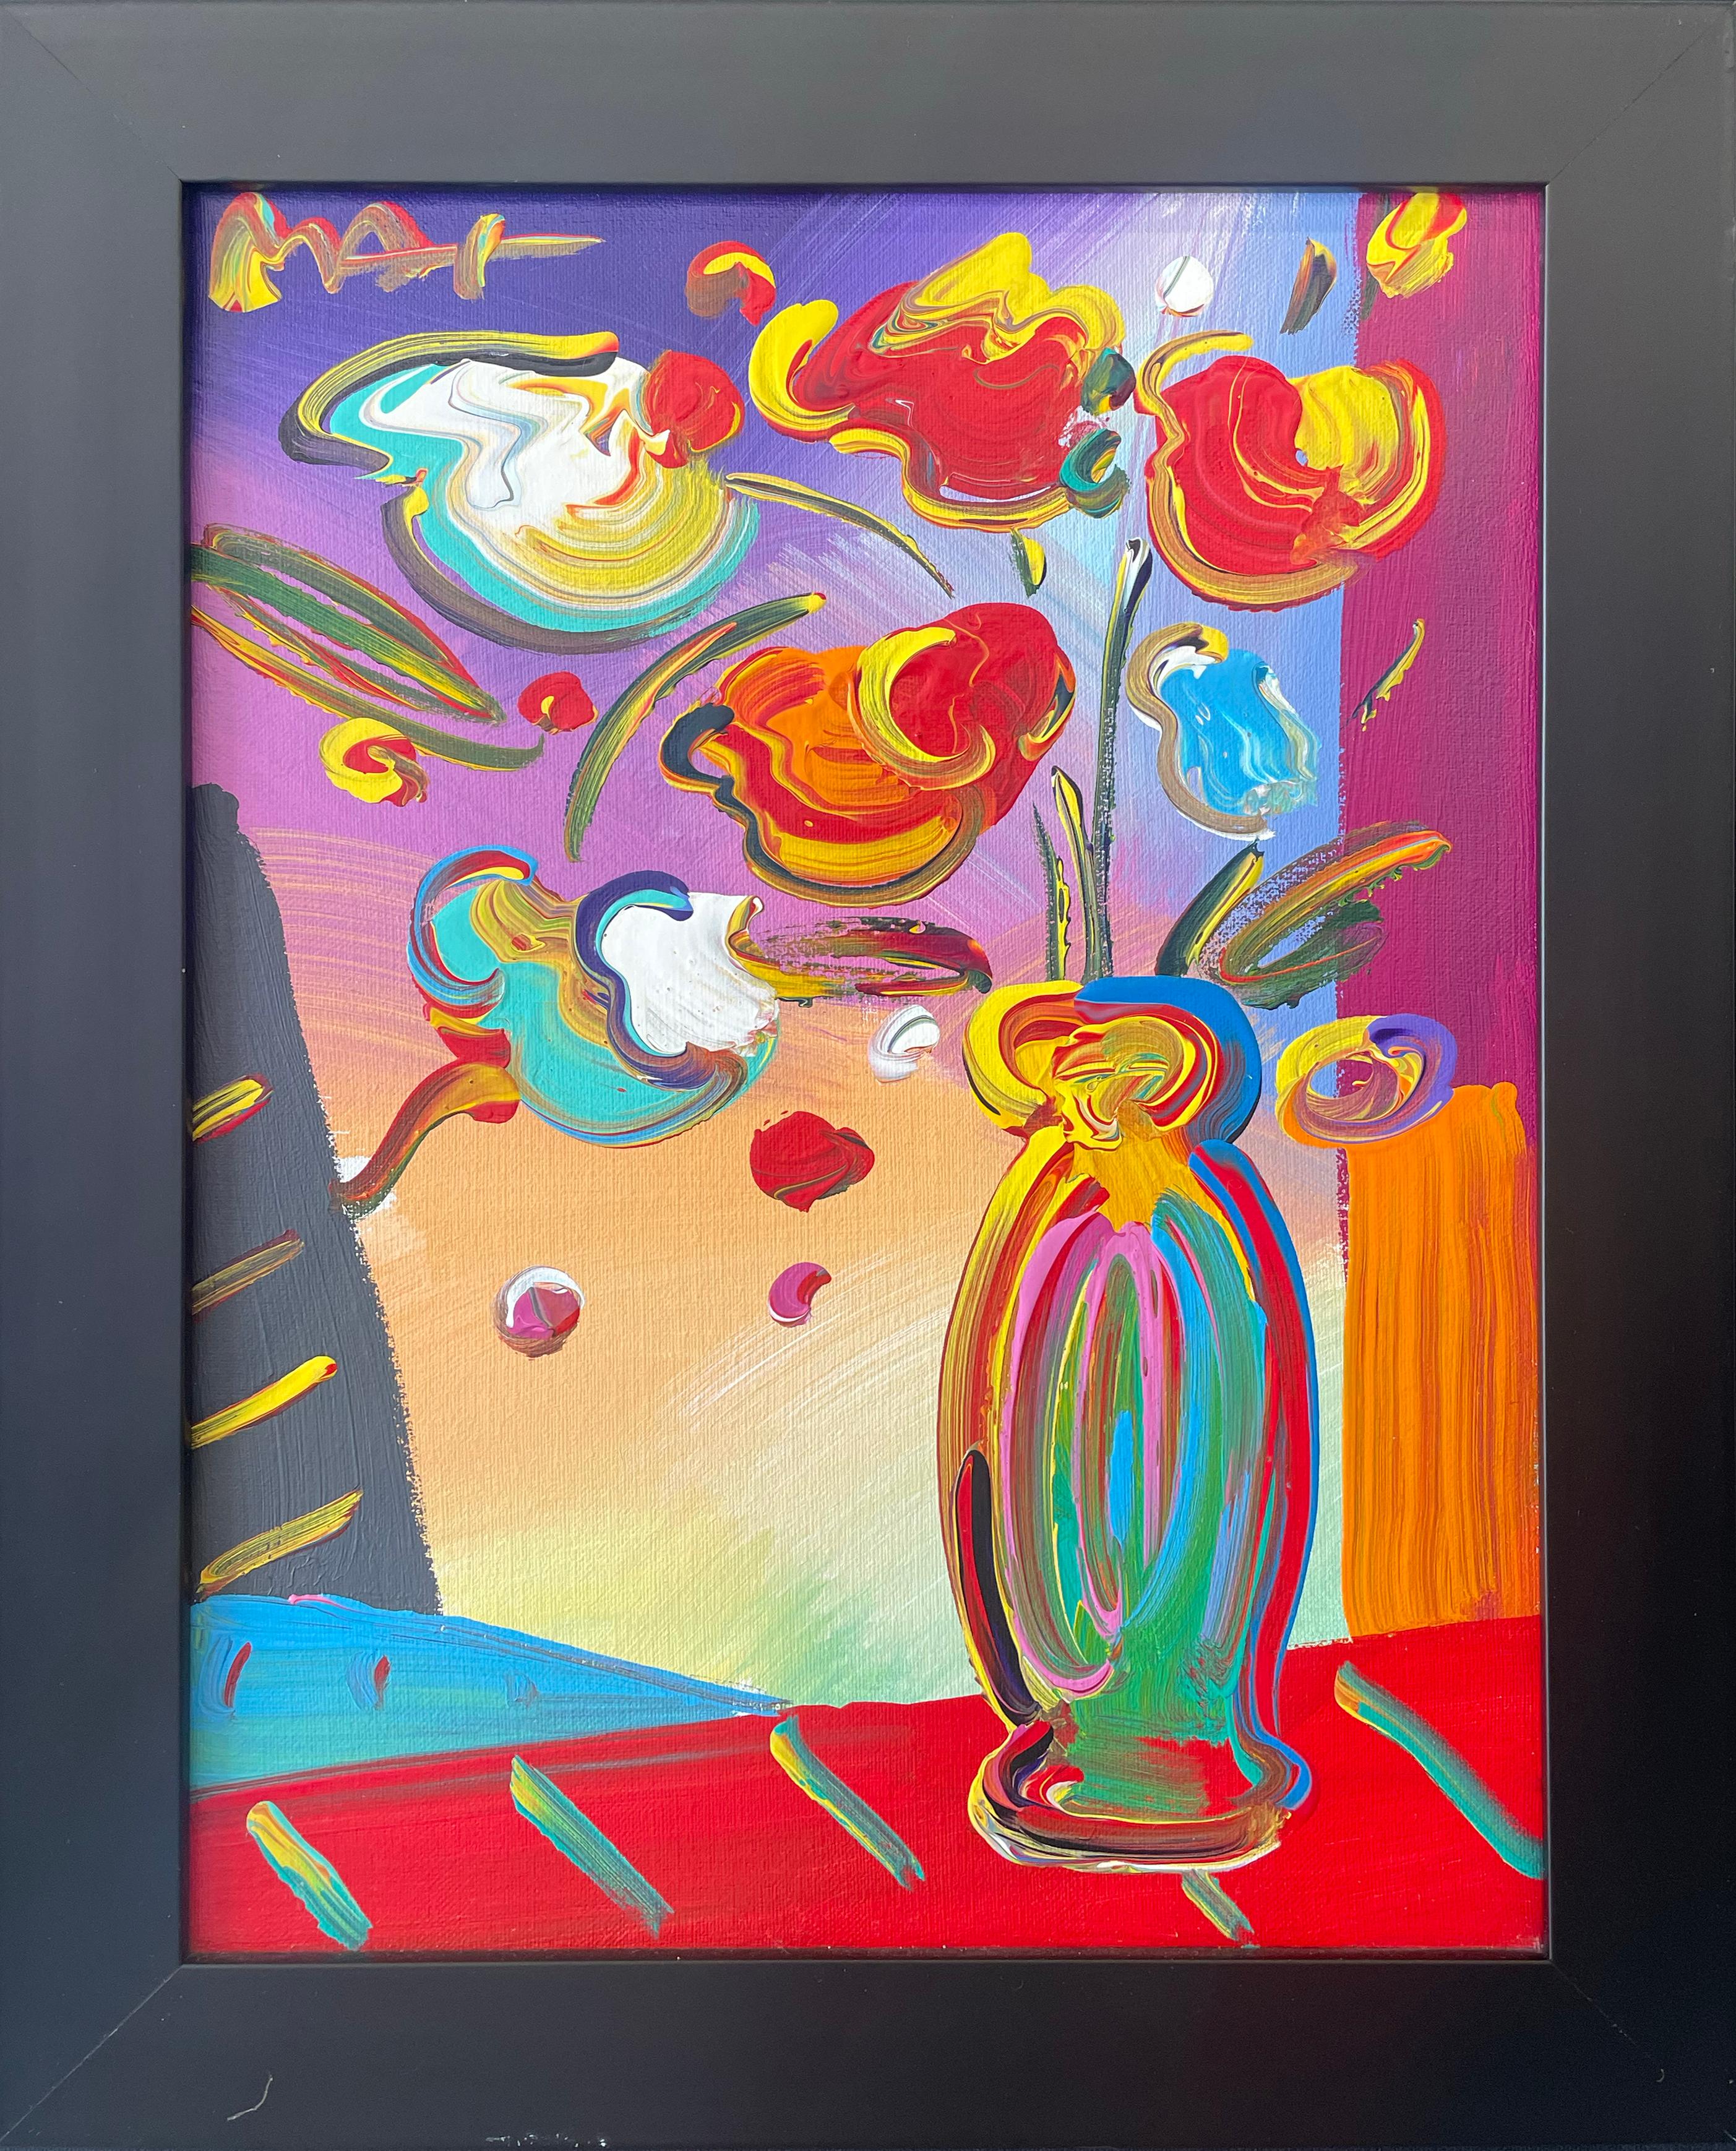 Flowers - Painting by Peter Max